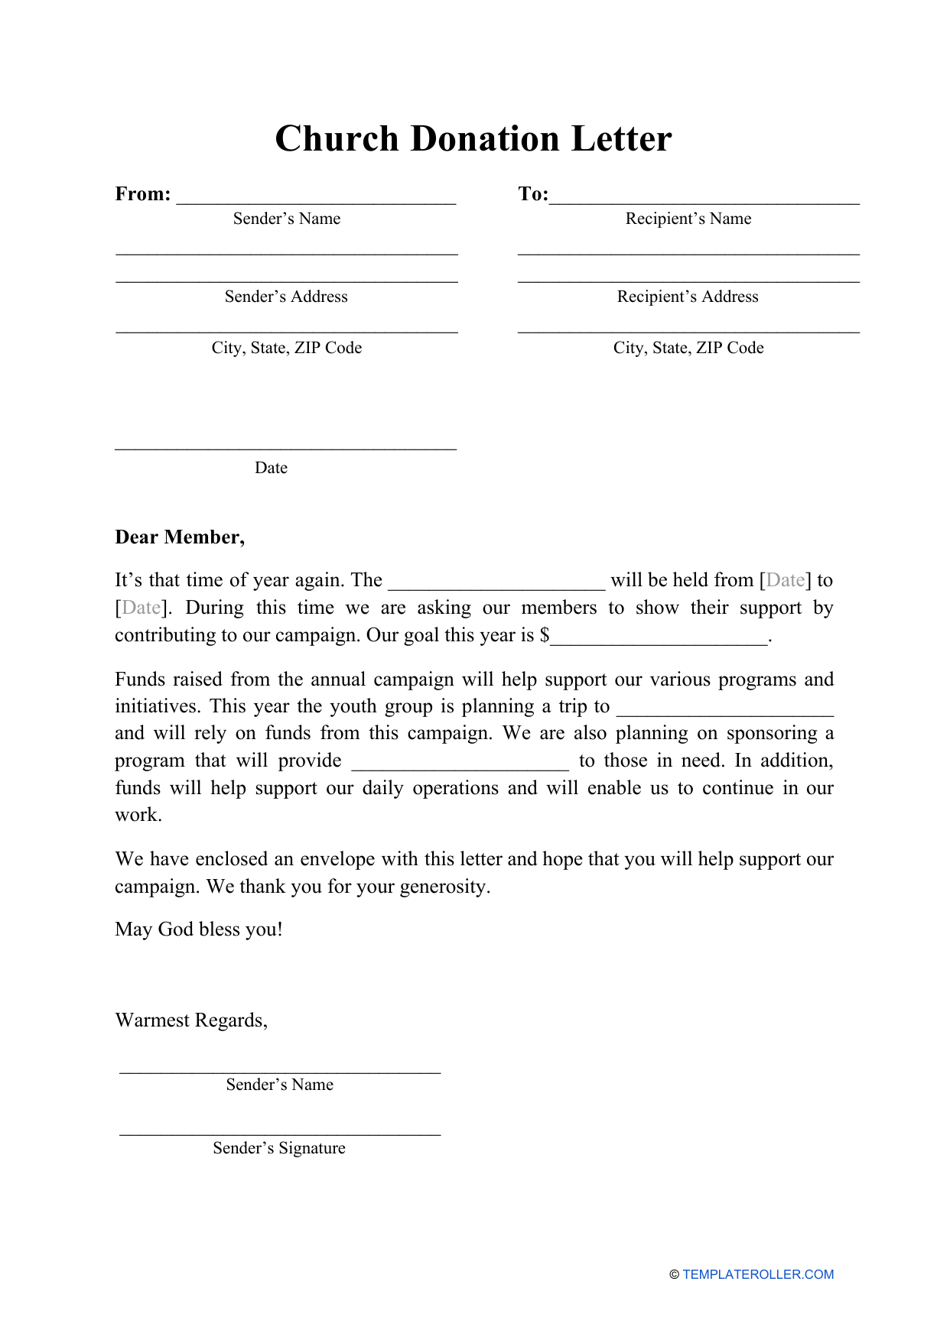 Church Donation Letter Template Download Printable PDF